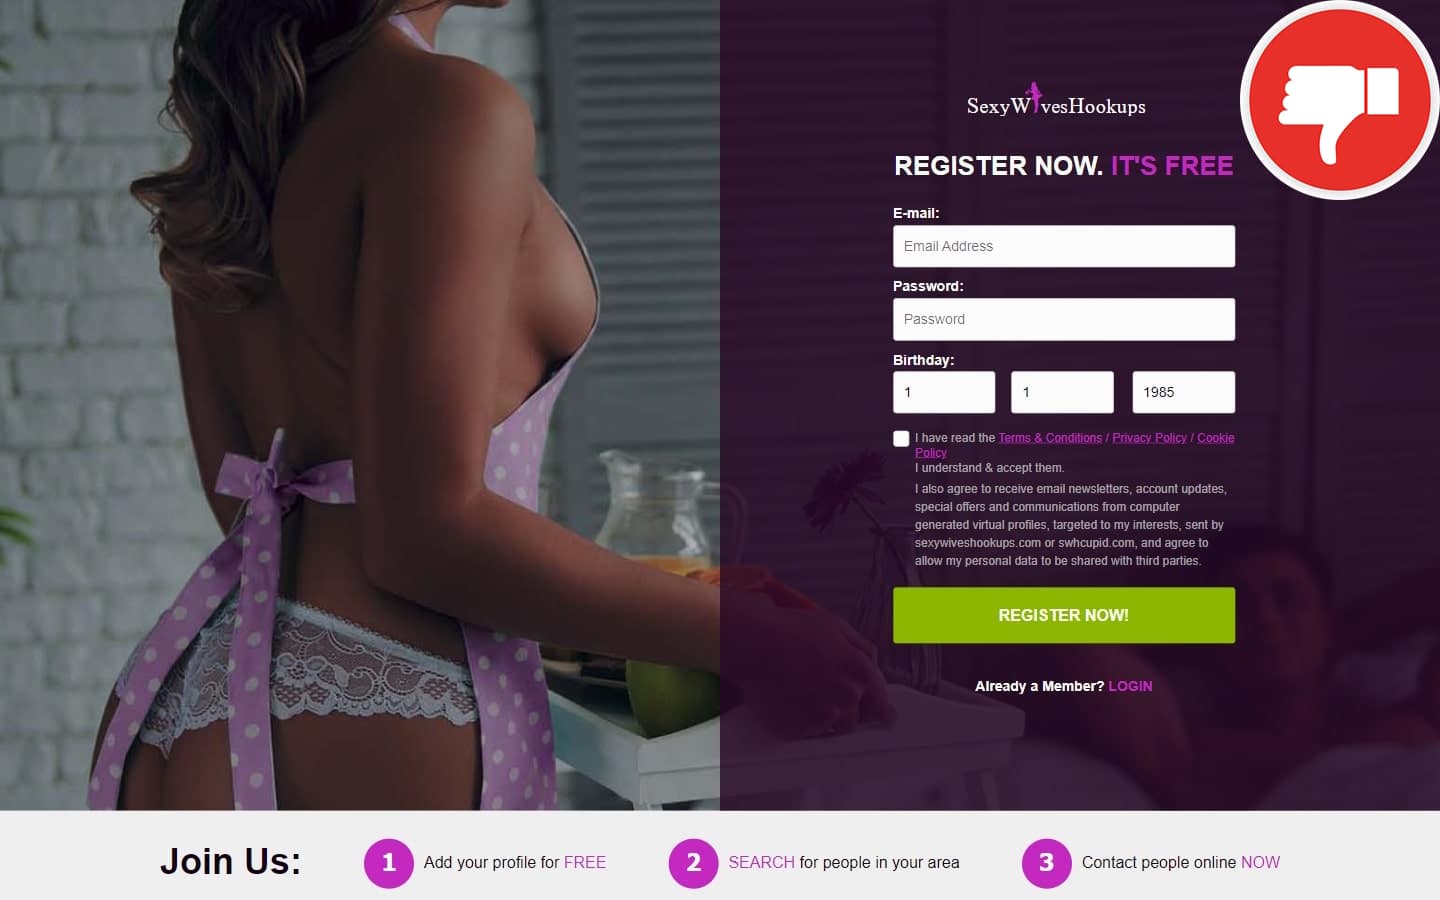 Review SexyWivesHookups.com scam experience